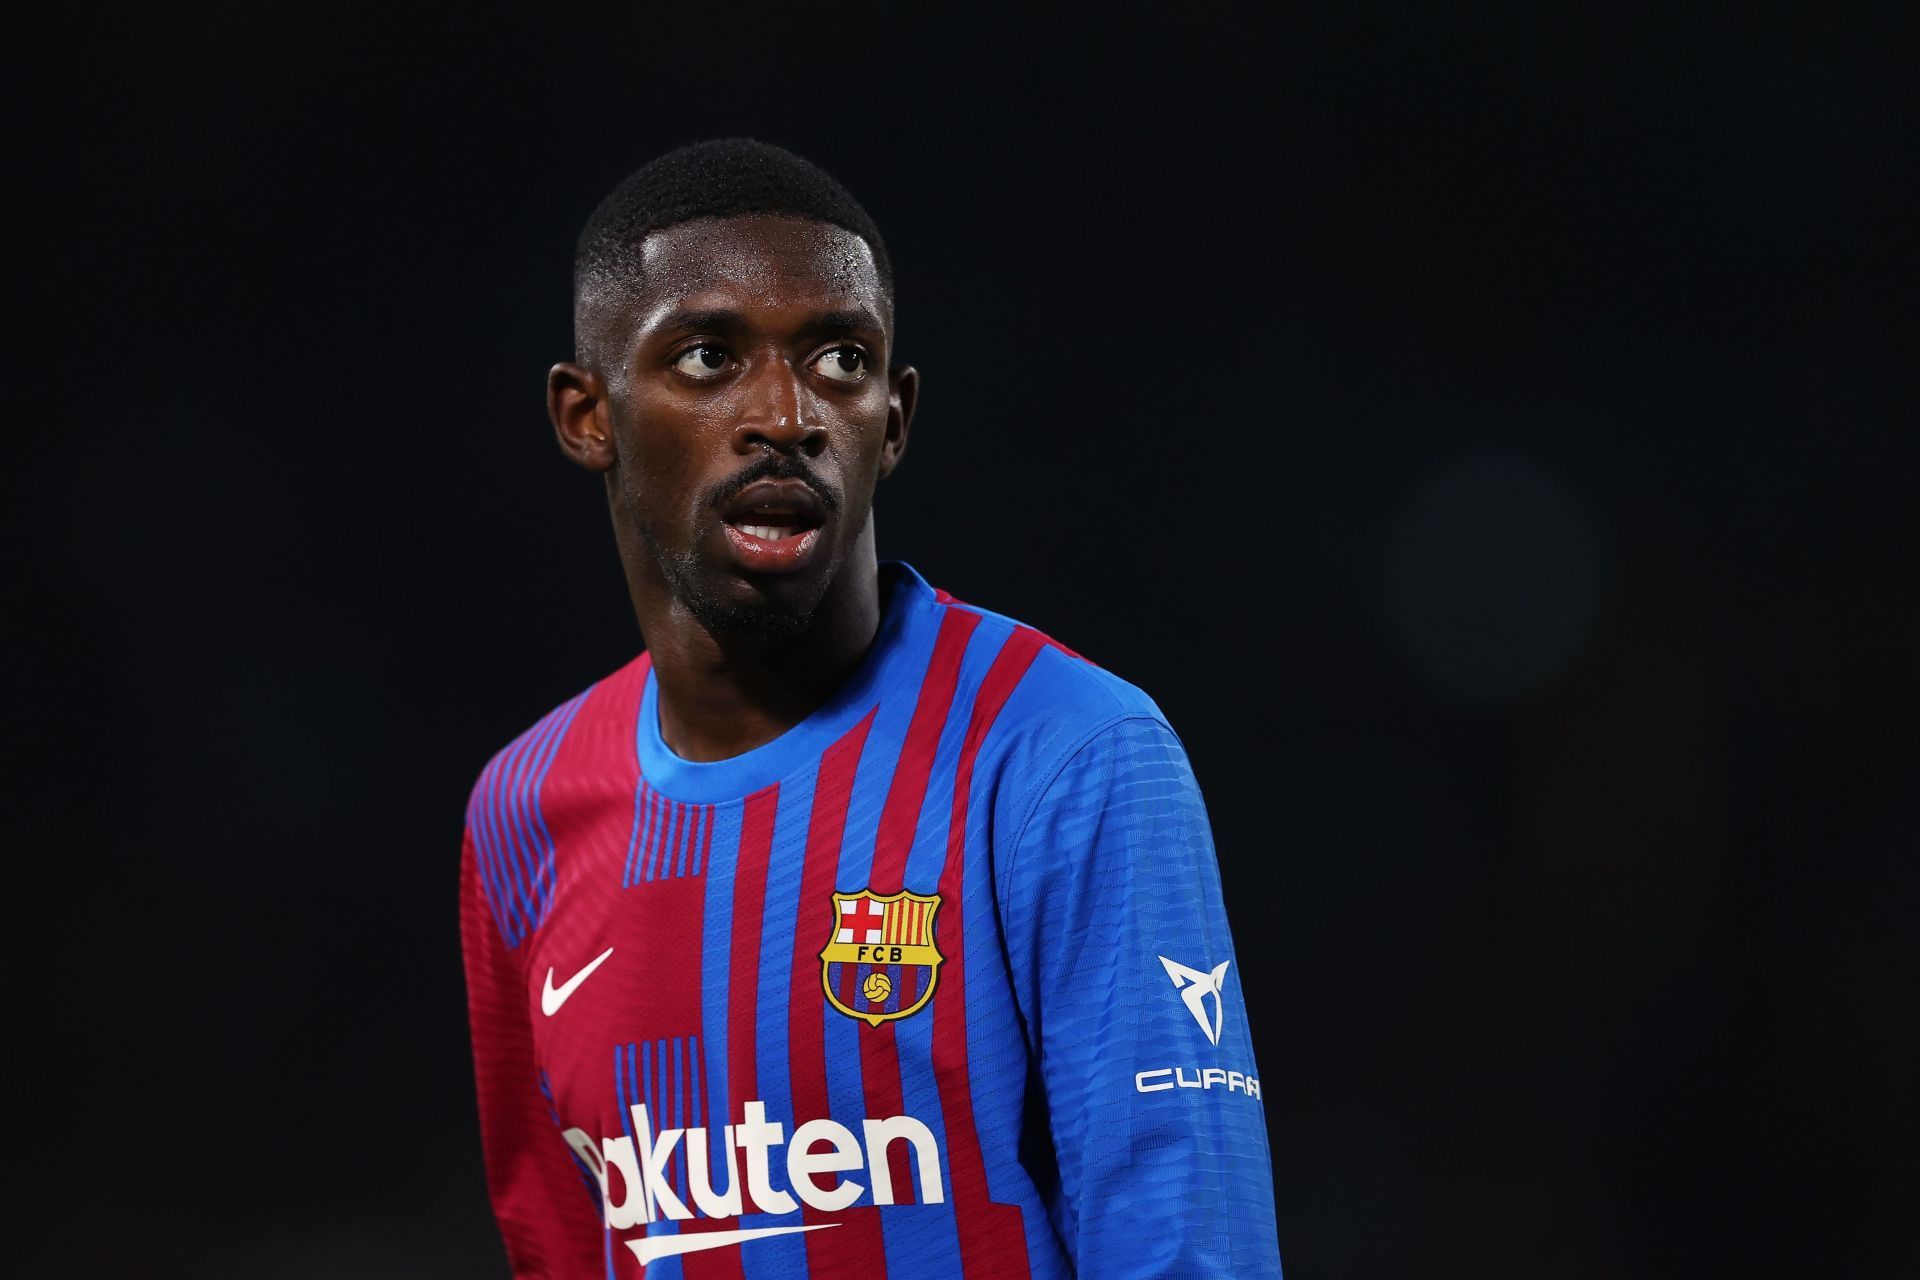 Ousmane Dembele is likely to leave the Camp Nou this summer